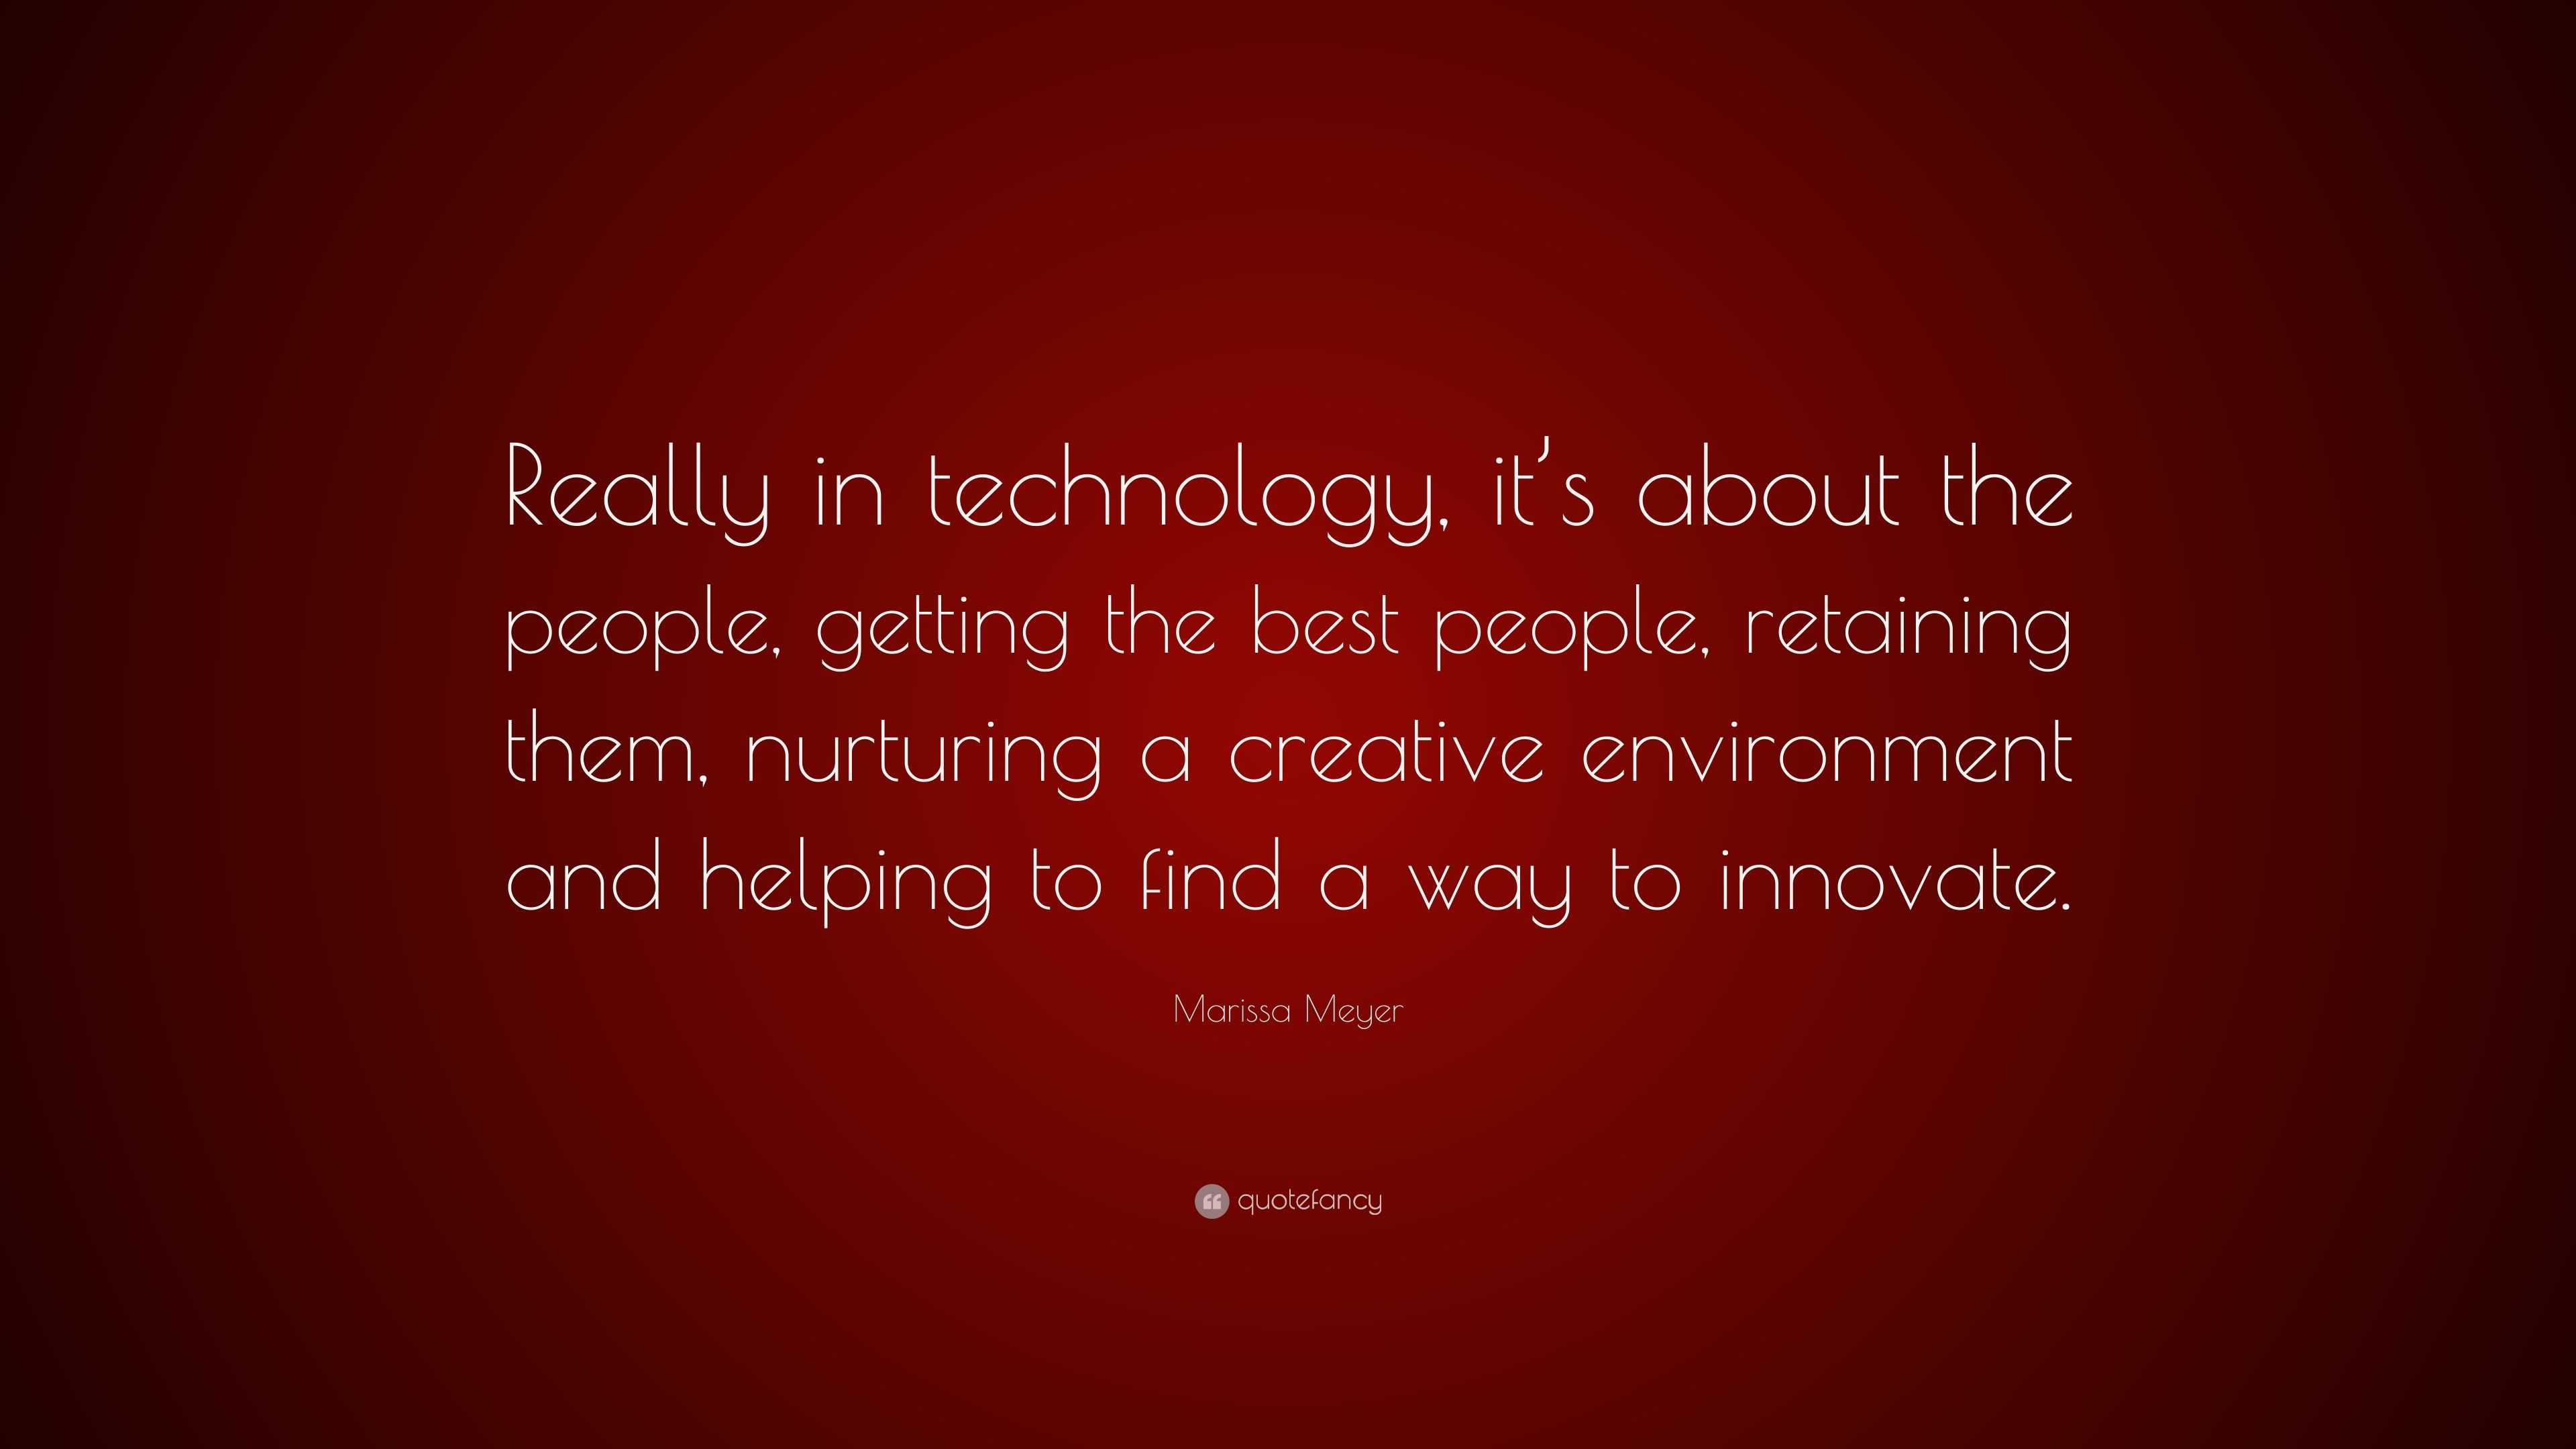 Marissa Meyer Quote: “Really in technology, it’s about the people ...